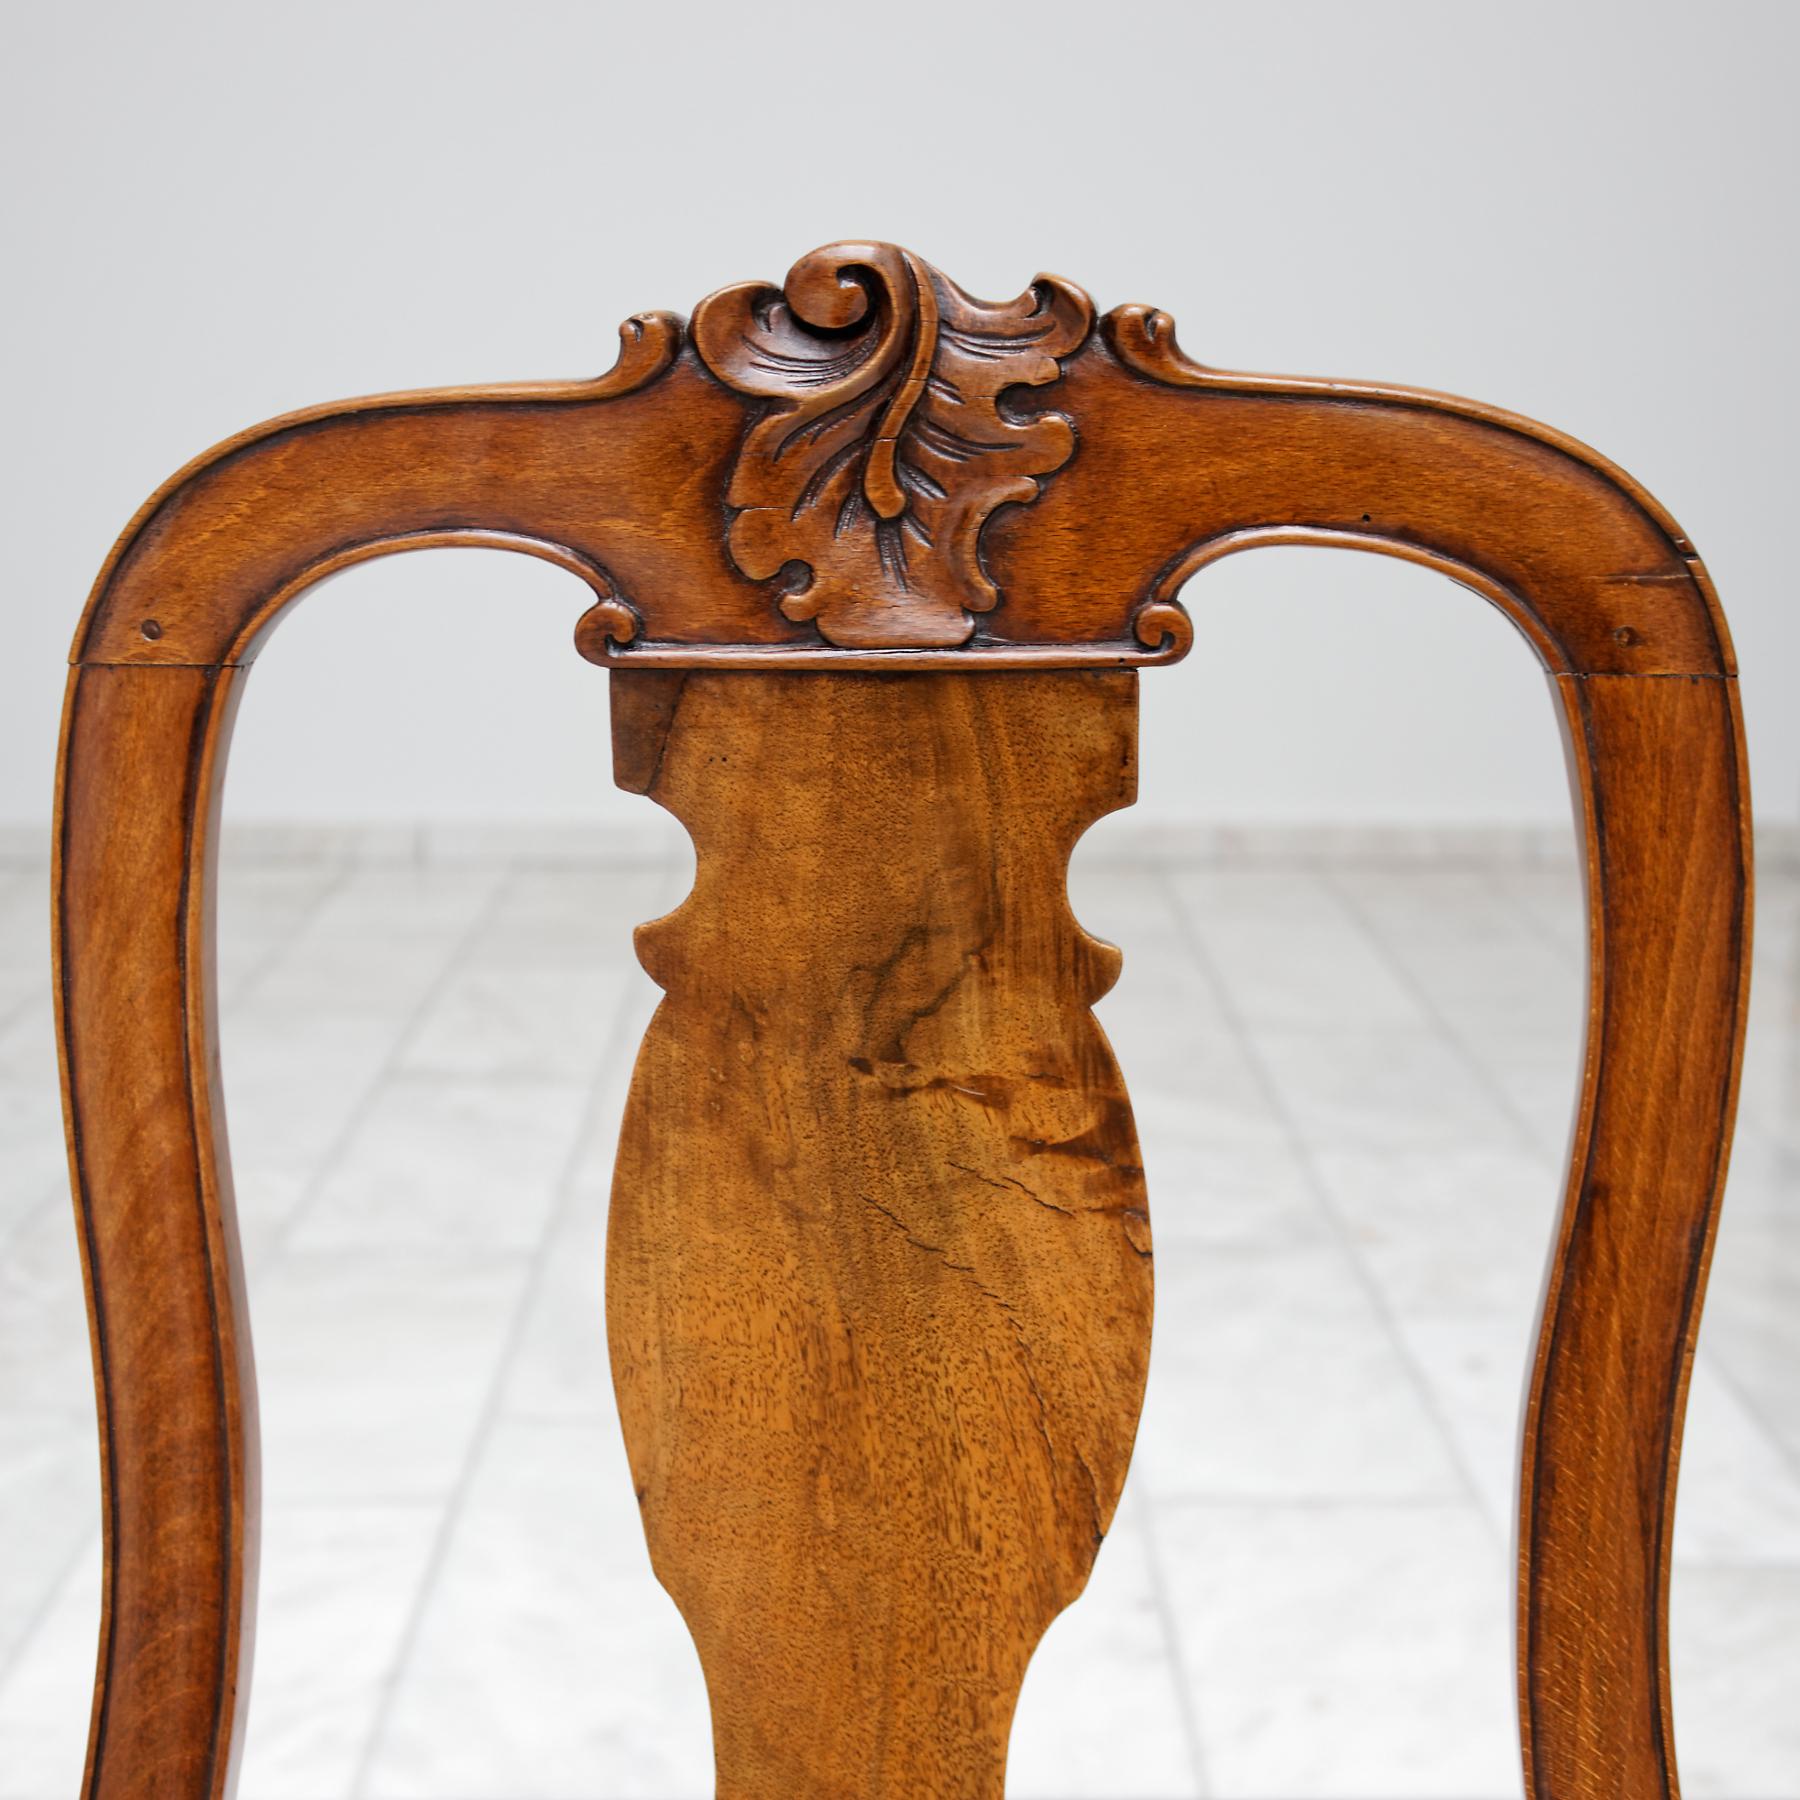 Set of six 18th century German Baroque walnut dining chairs, probably from Saxony. With baluster shape splat and drop in seat covered in yellow silk (modern). The seat rail and back with central carved foliate spray and acanthus leave. On cabriole